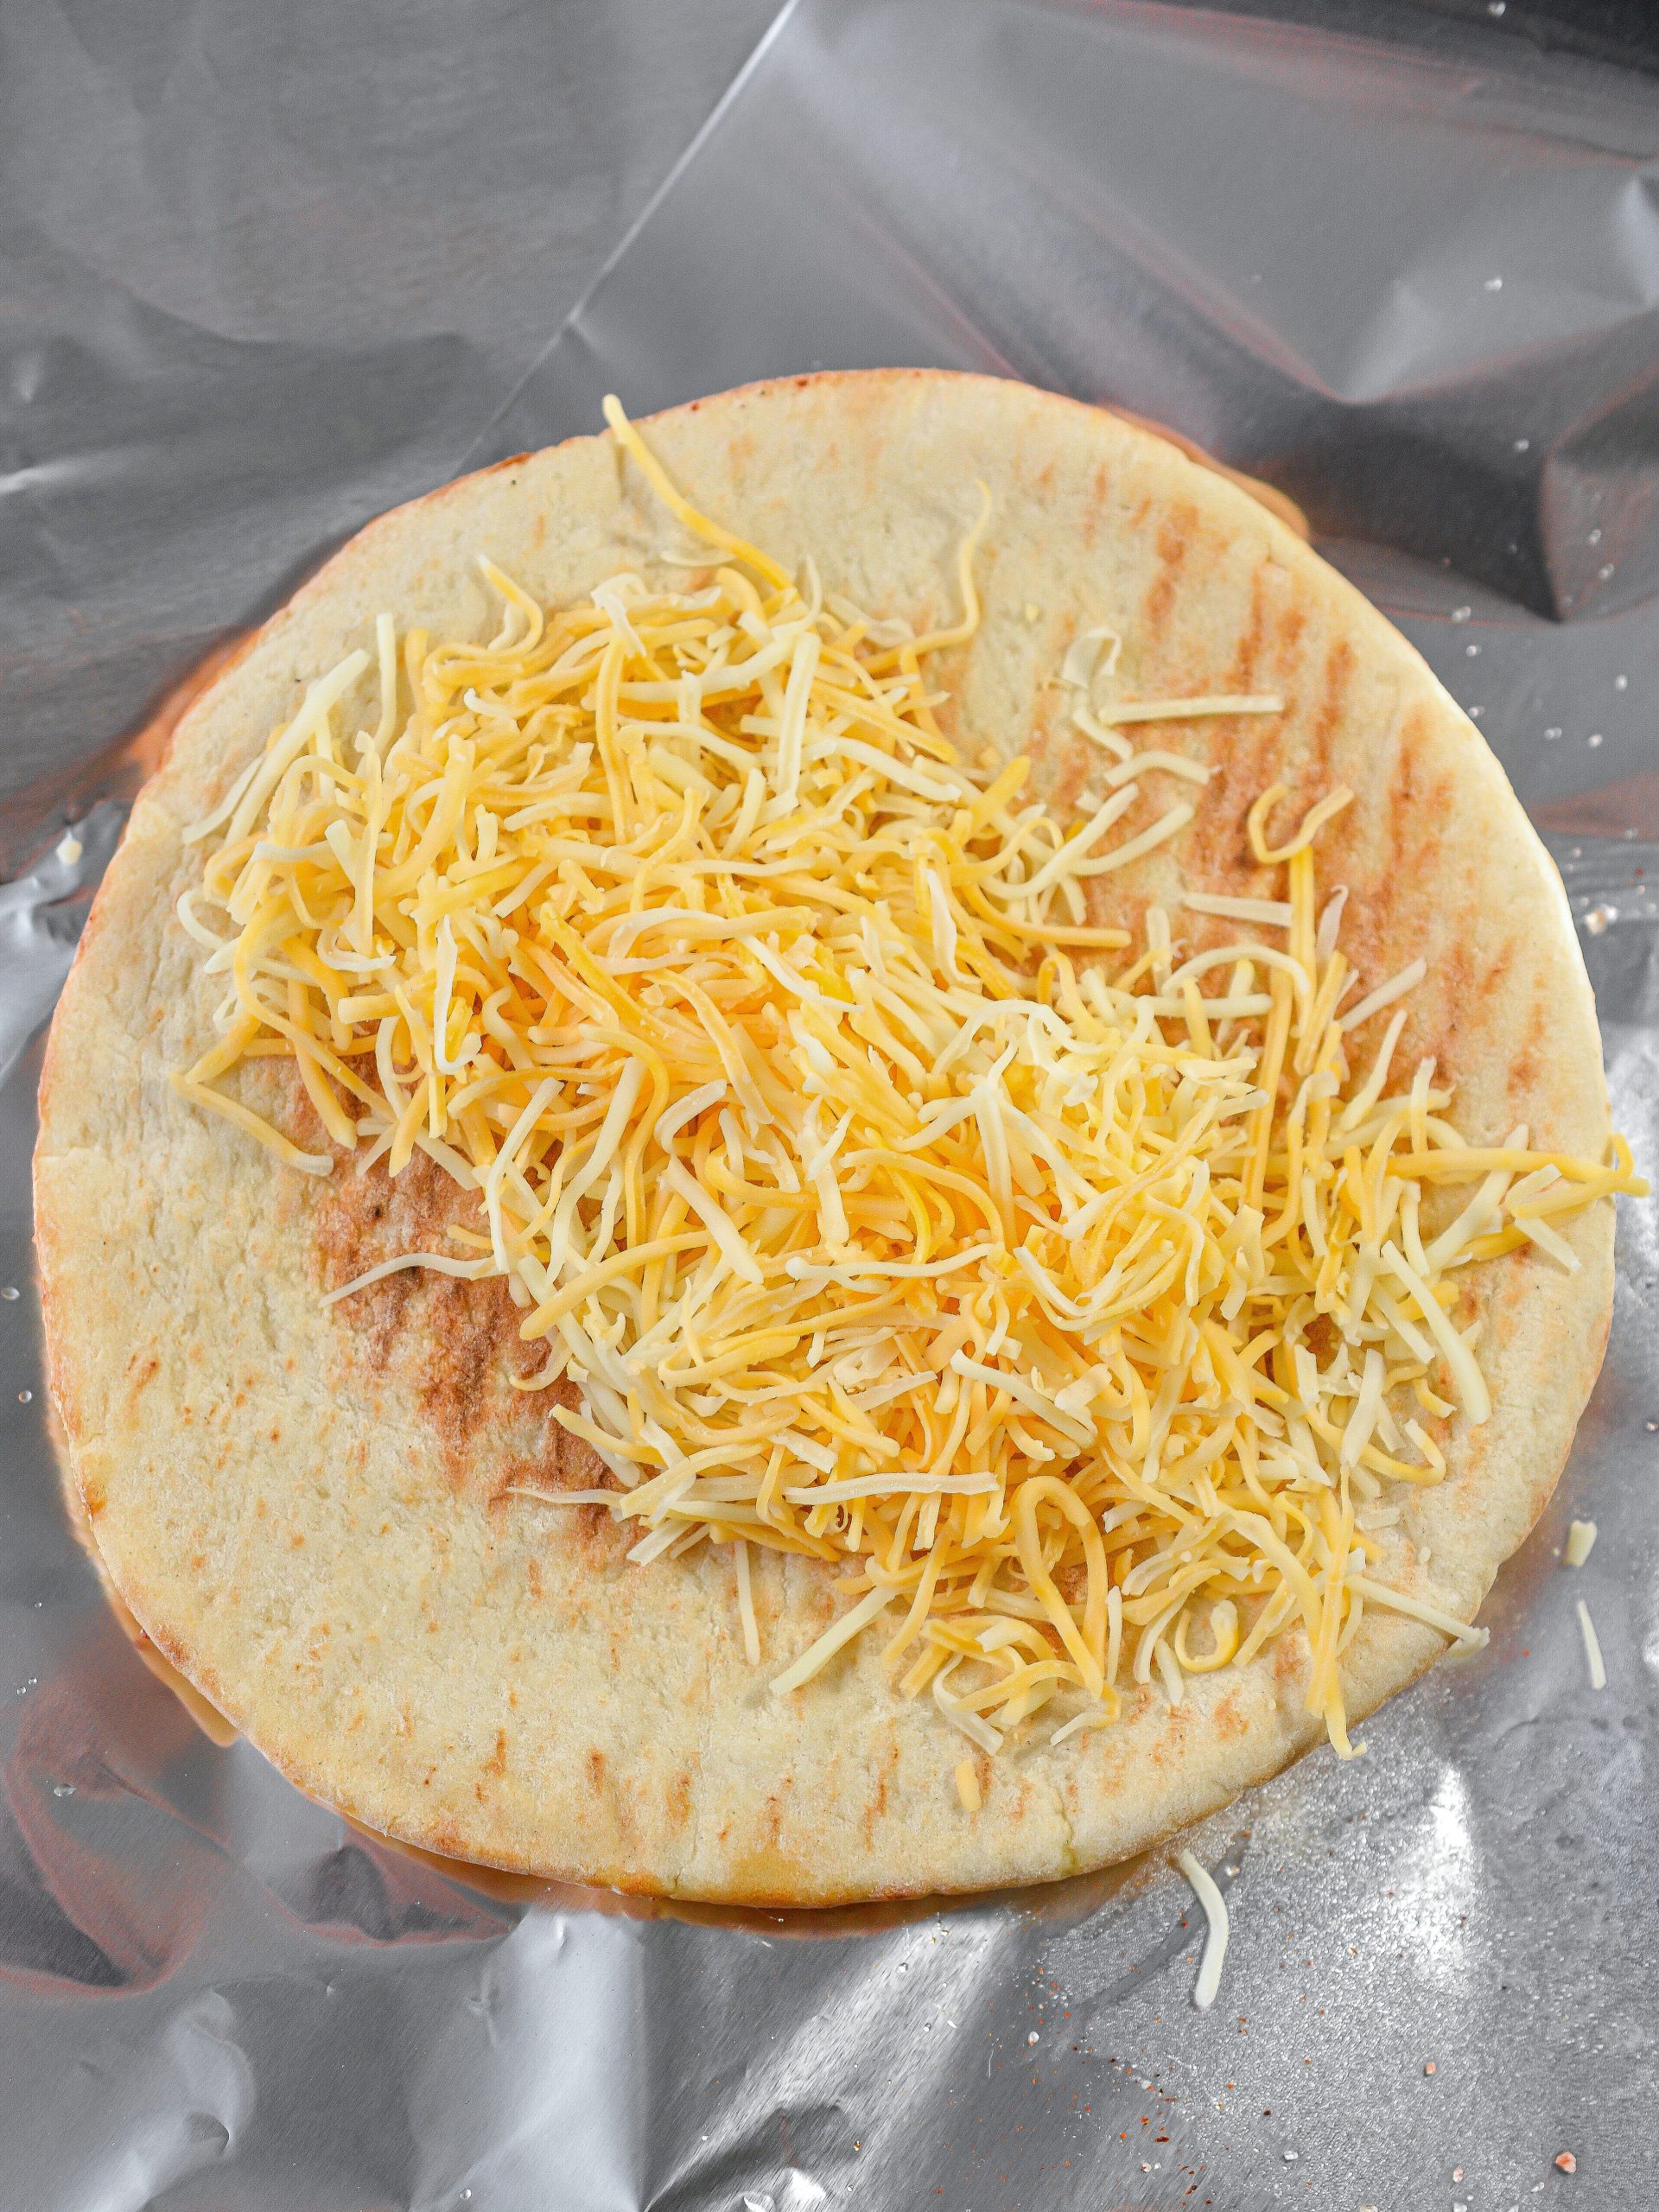  Place a layer of cheese down the center of each pita bread.